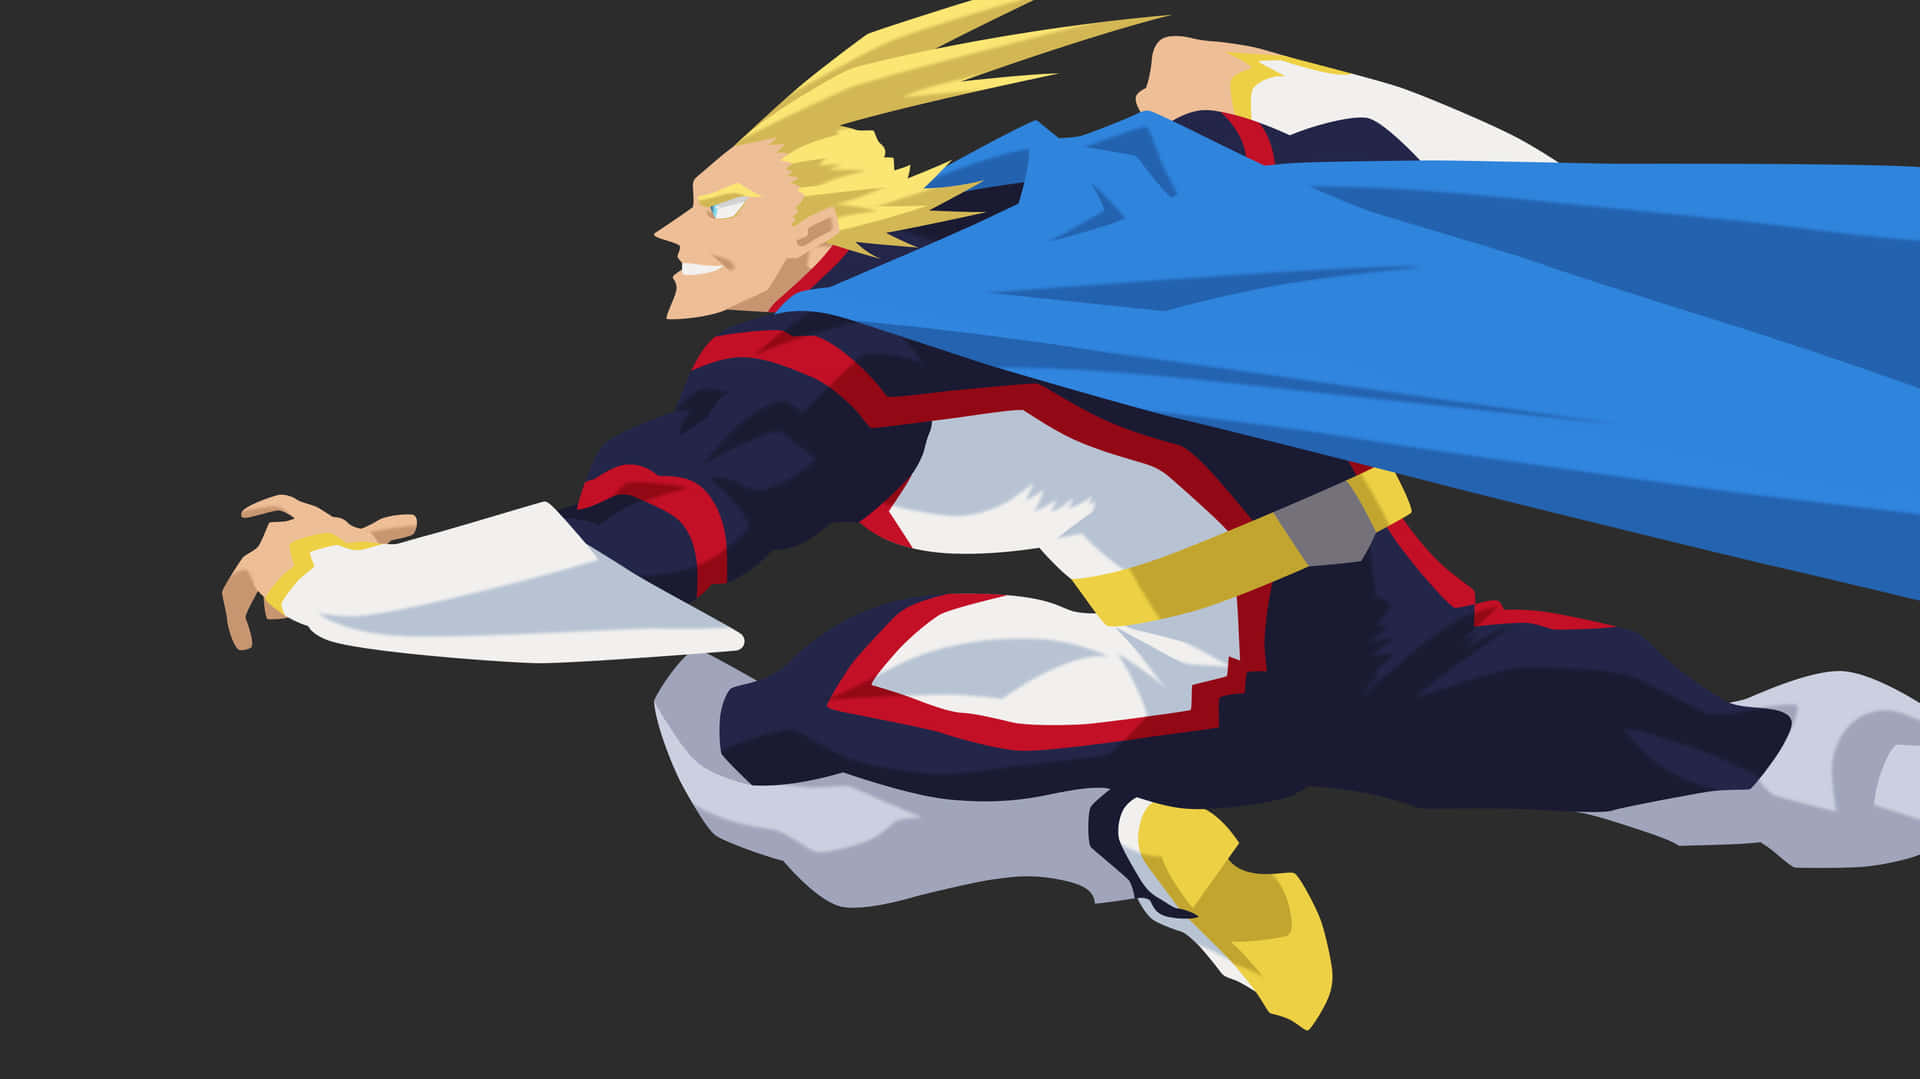 All Might Texas Smash Punch Picture